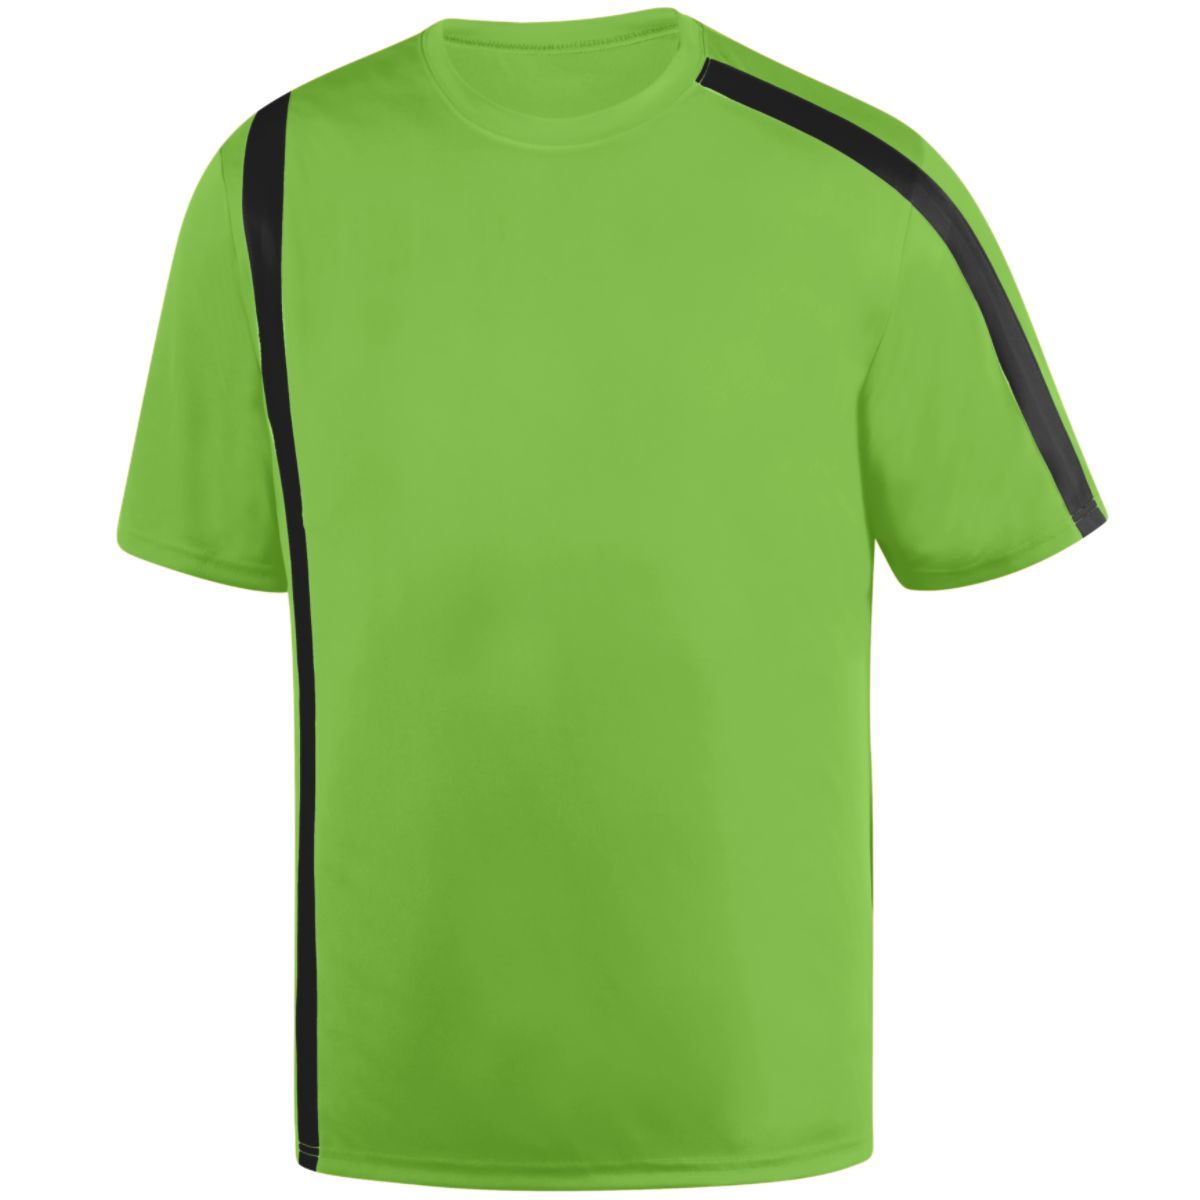 Augusta Sportswear Attacking Third Jersey in Lime/Black  -Part of the Adult, Adult-Jersey, Augusta-Products, Soccer, Shirts, All-Sports-1 product lines at KanaleyCreations.com